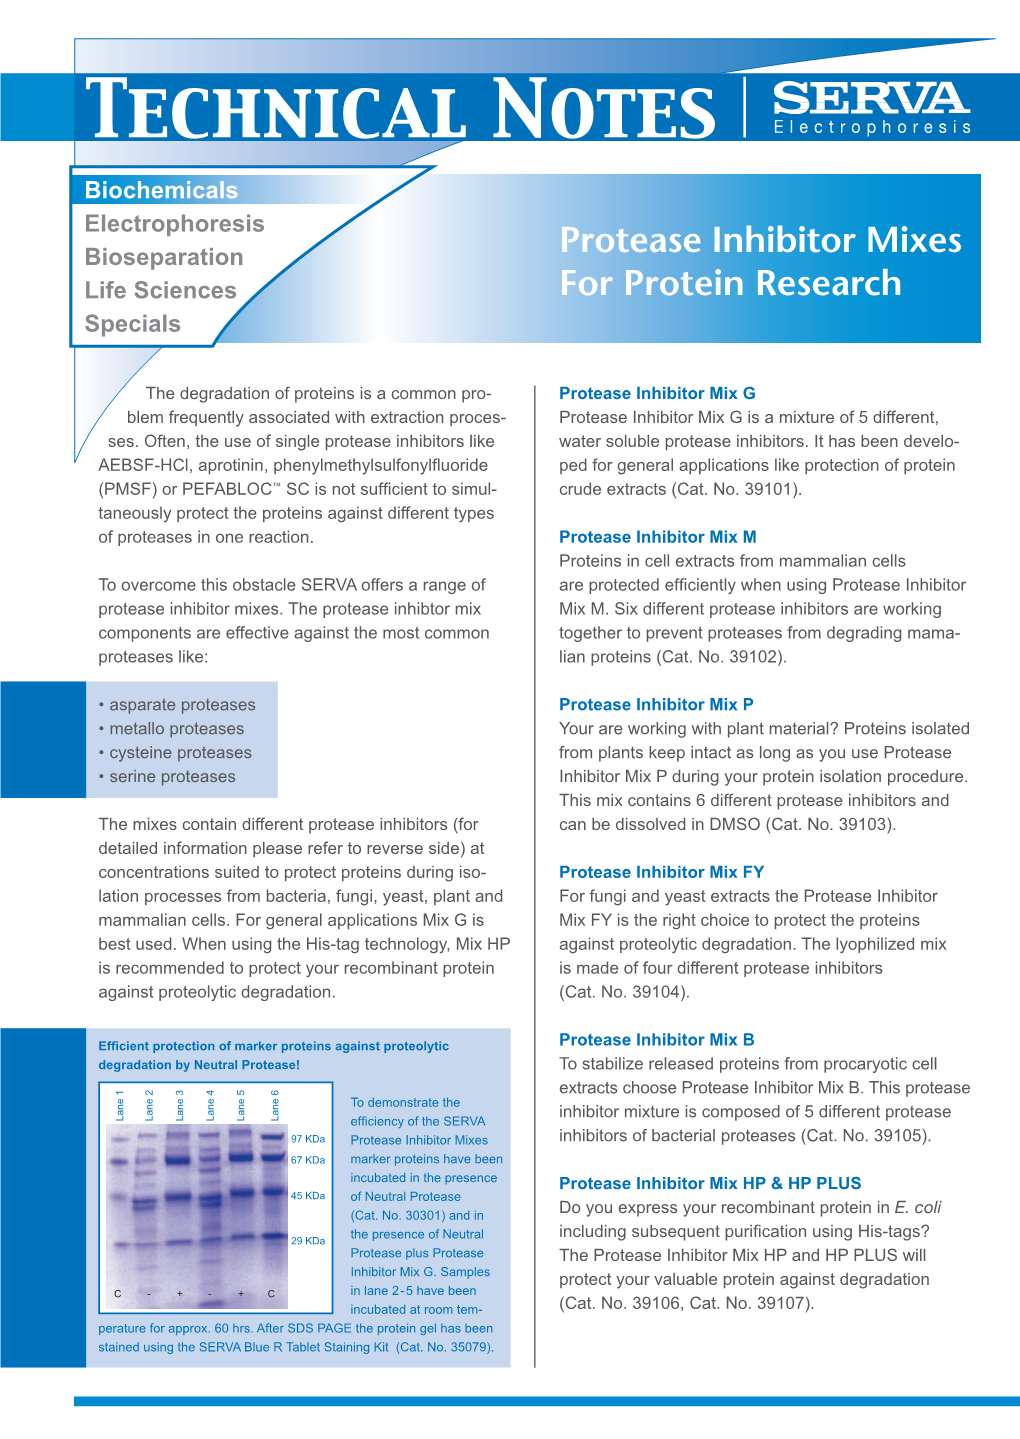 Protease and Phosphatase Inhibitor Mixes